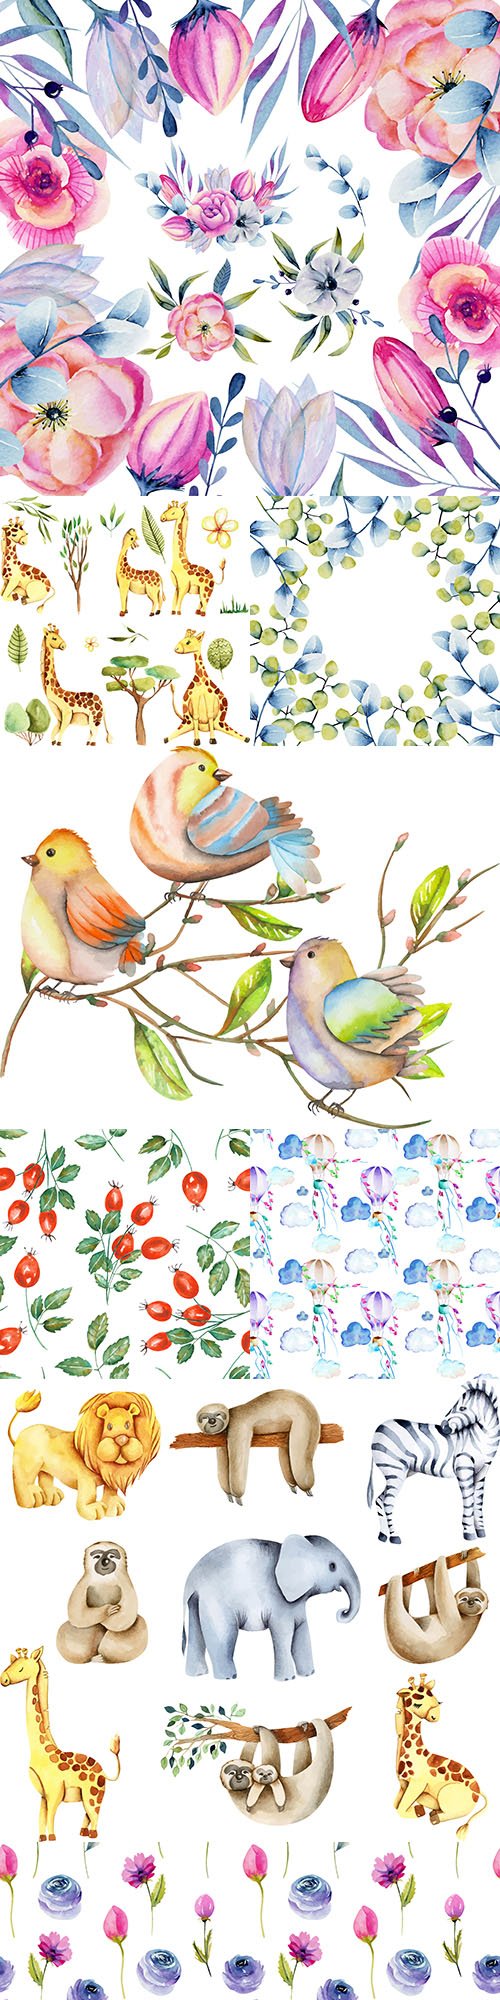 Animals and flower bouquets collection watercolor illustrations